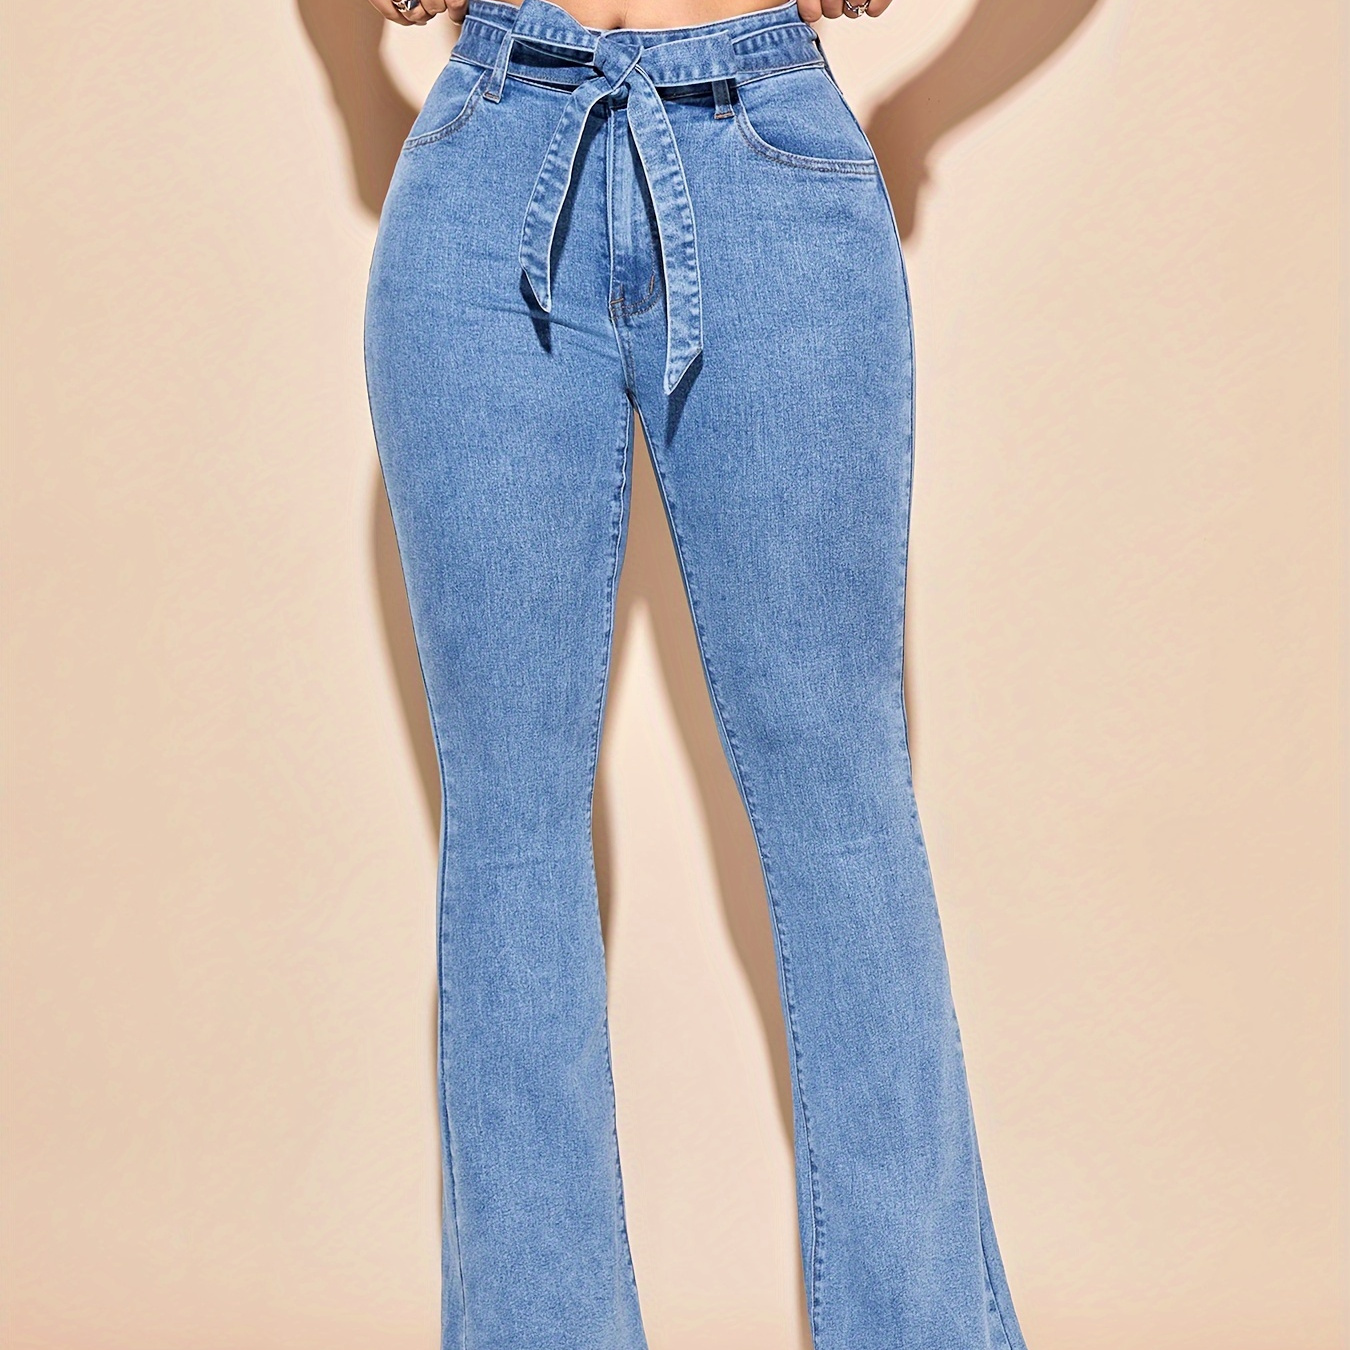 

Blue High Waist Flare Jeans, High Stretch With Waistband Bell Bottom Jeans, Women's Denim Jeans & Clothing